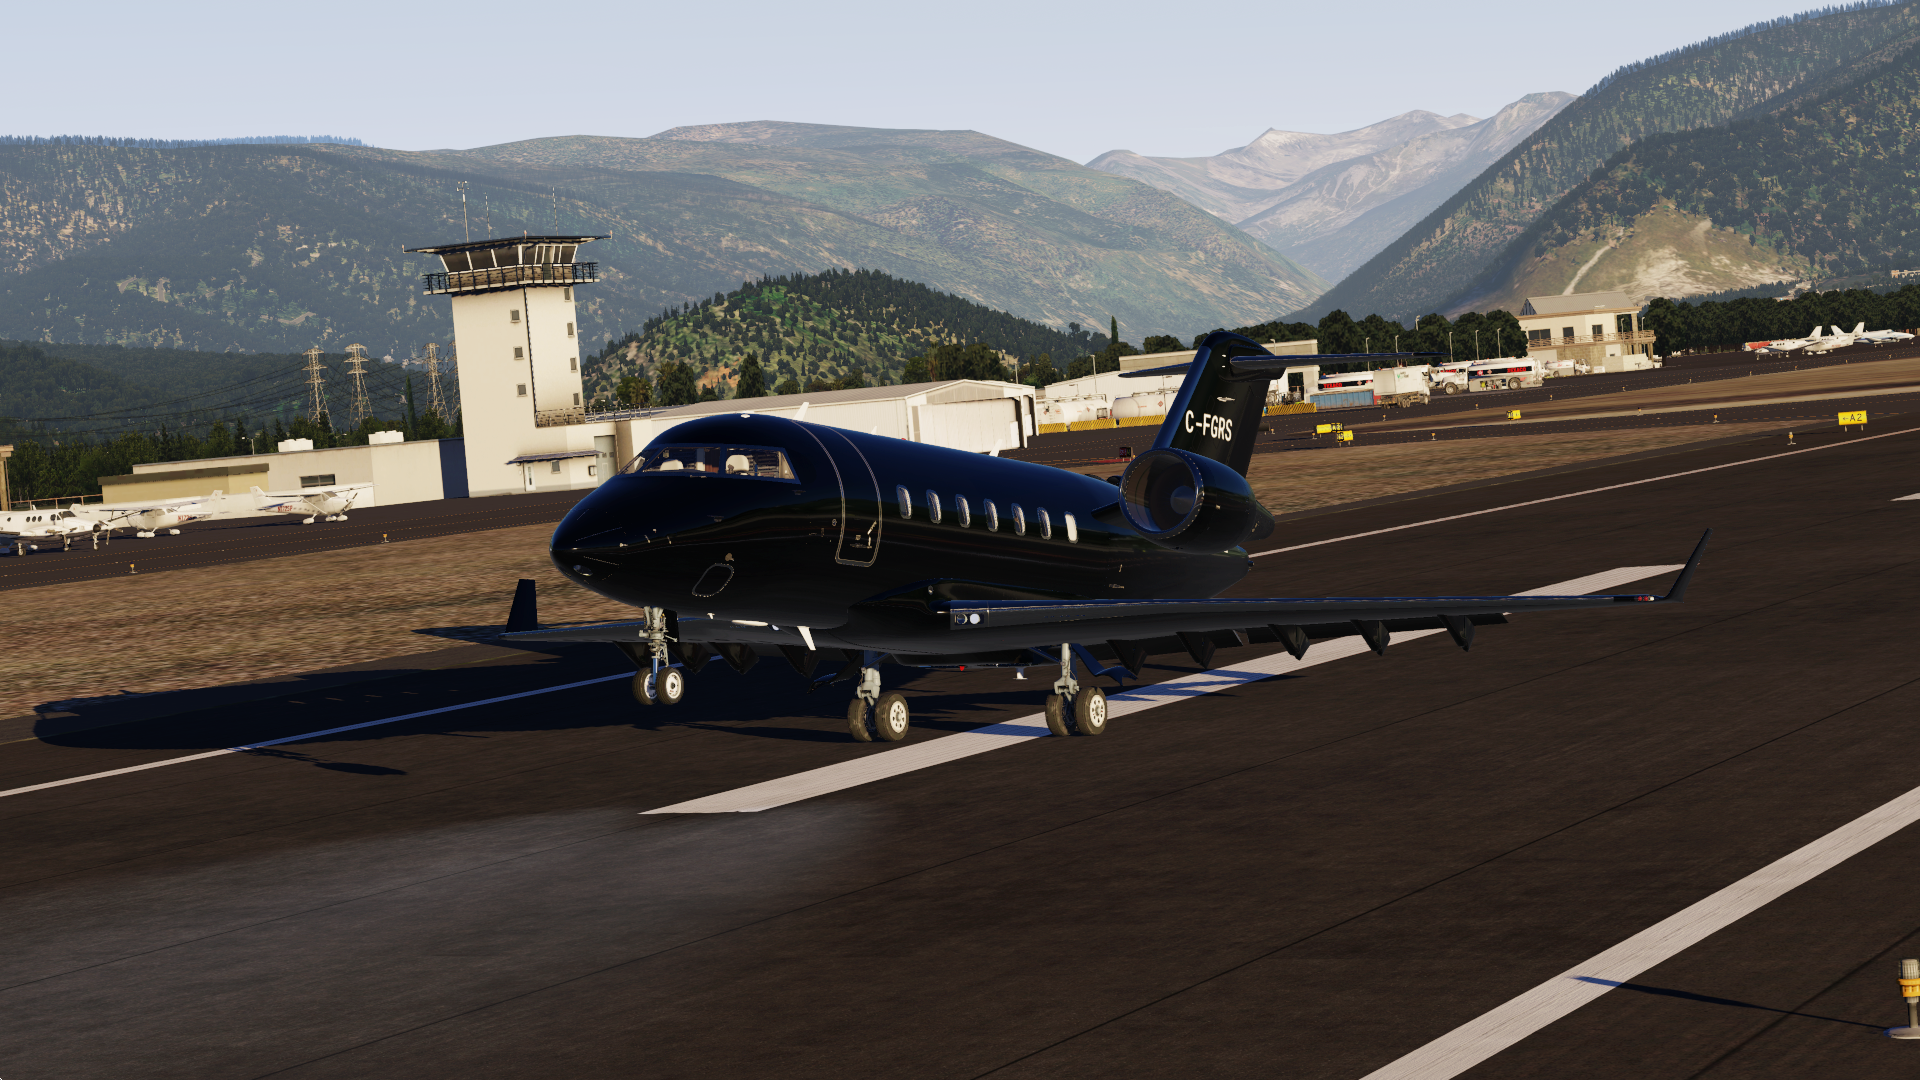 C-FGRS - Clean Black Livery for the Hot Start Challenger 650